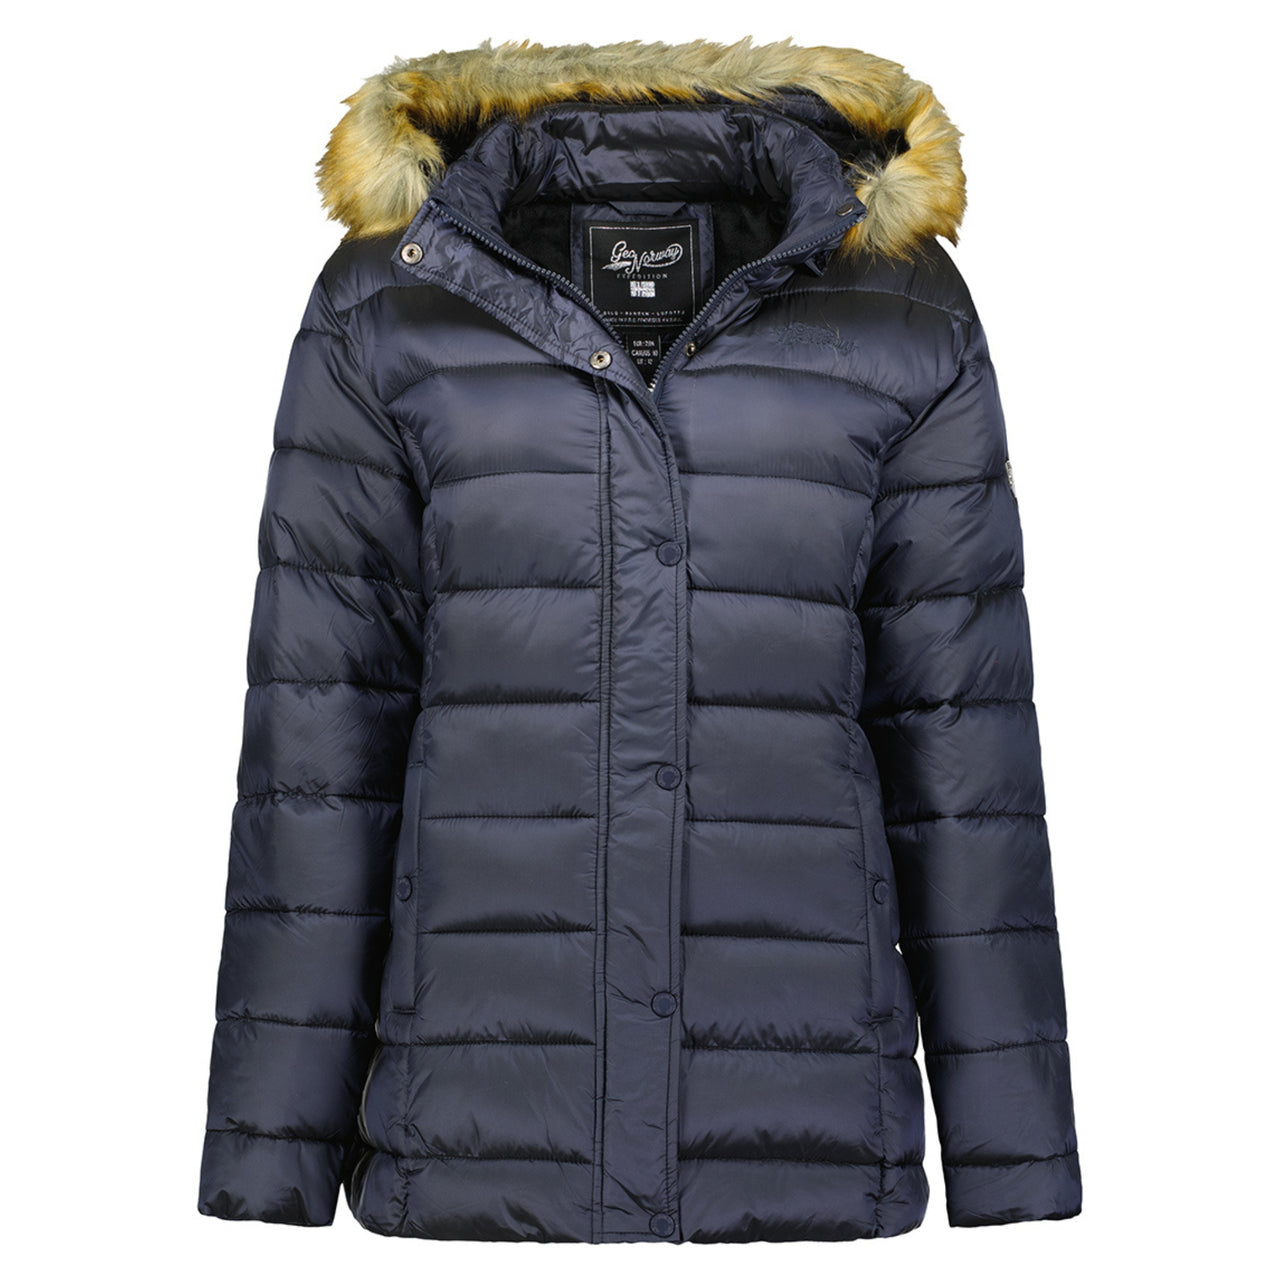 Geographical Norway Parka Mujer Abeille - Cálida chaqueta con capucha